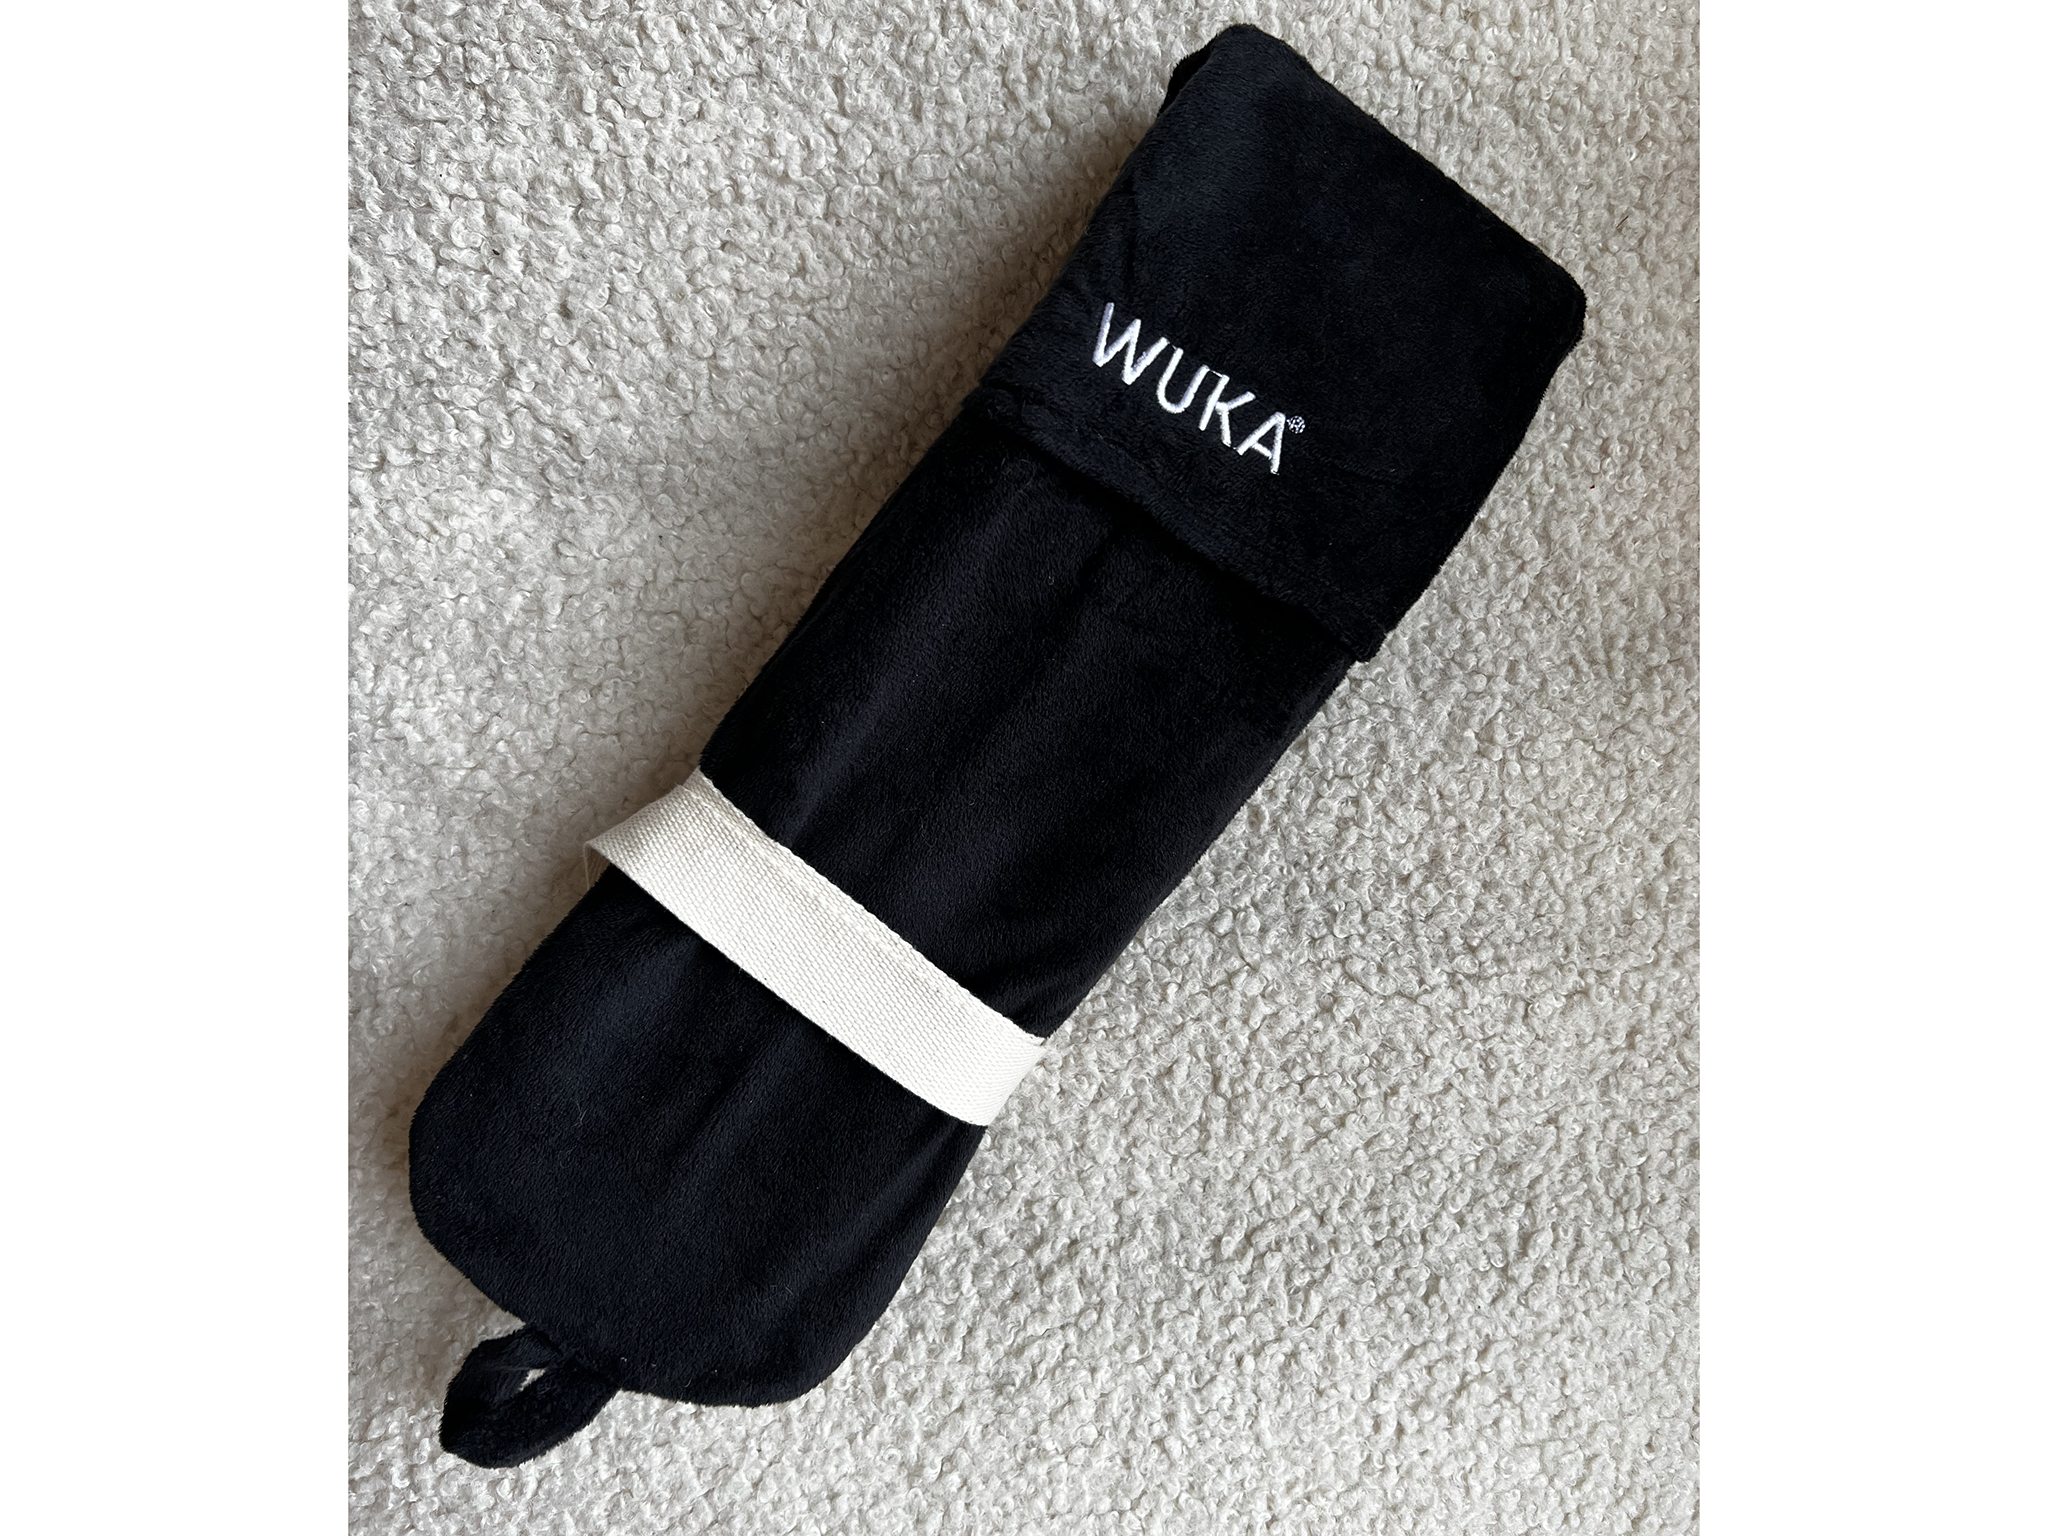 https://static.independent.co.uk/2022/12/08/15/wuka-wearable-hot-water-bottle-indybest-review.png